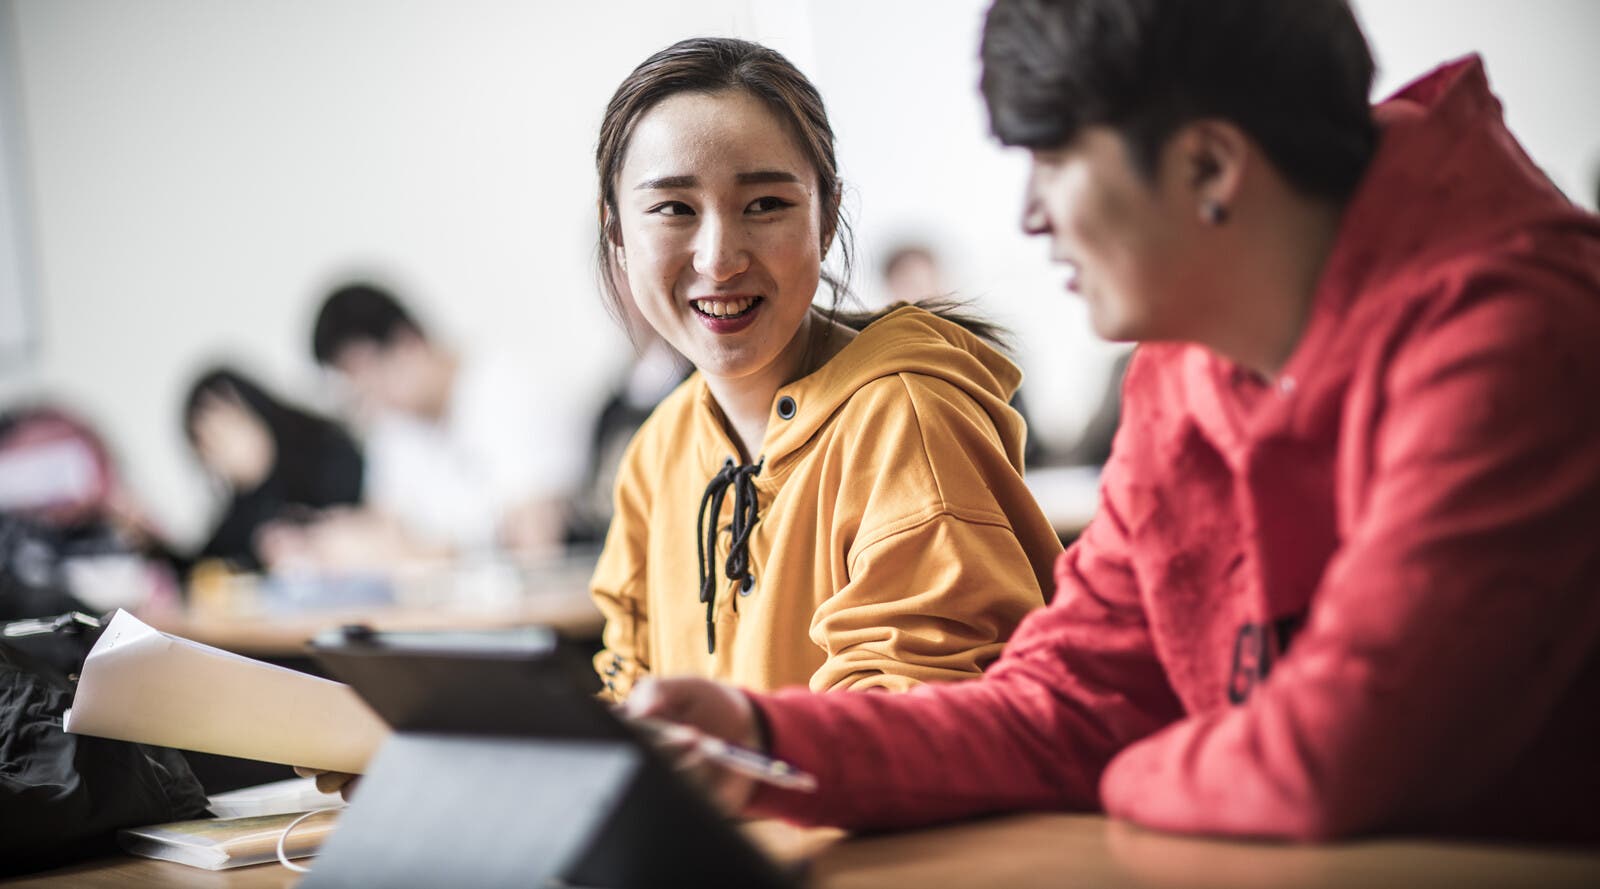 Students smiling and talking in class